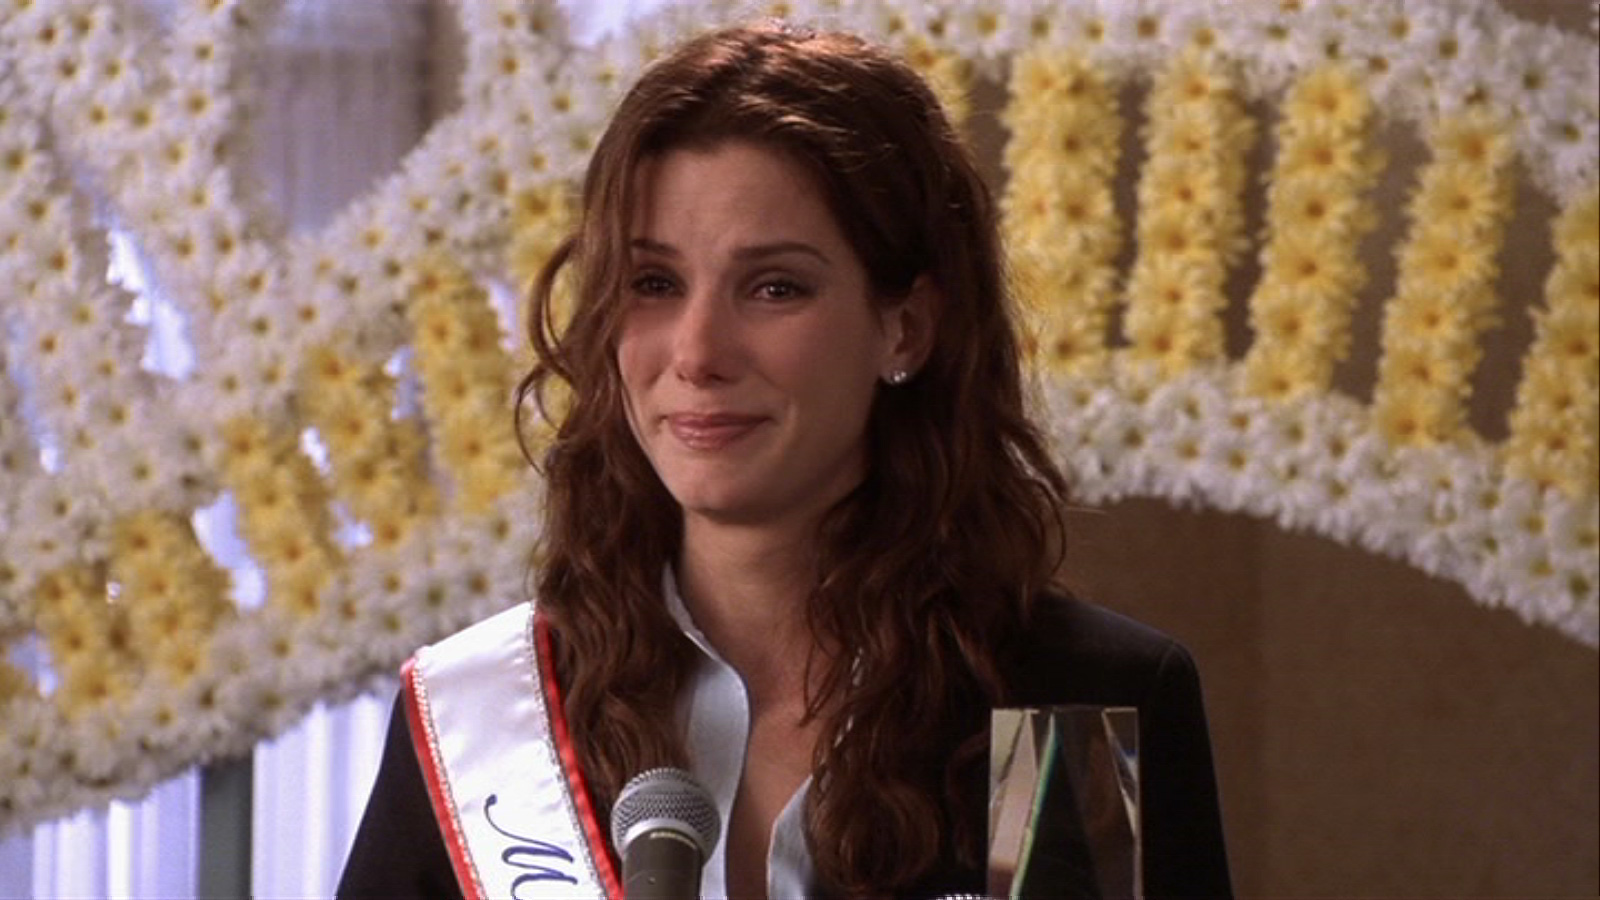 Miss congeniality outfits - 🧡 Prime Video: Miss Congeniality.